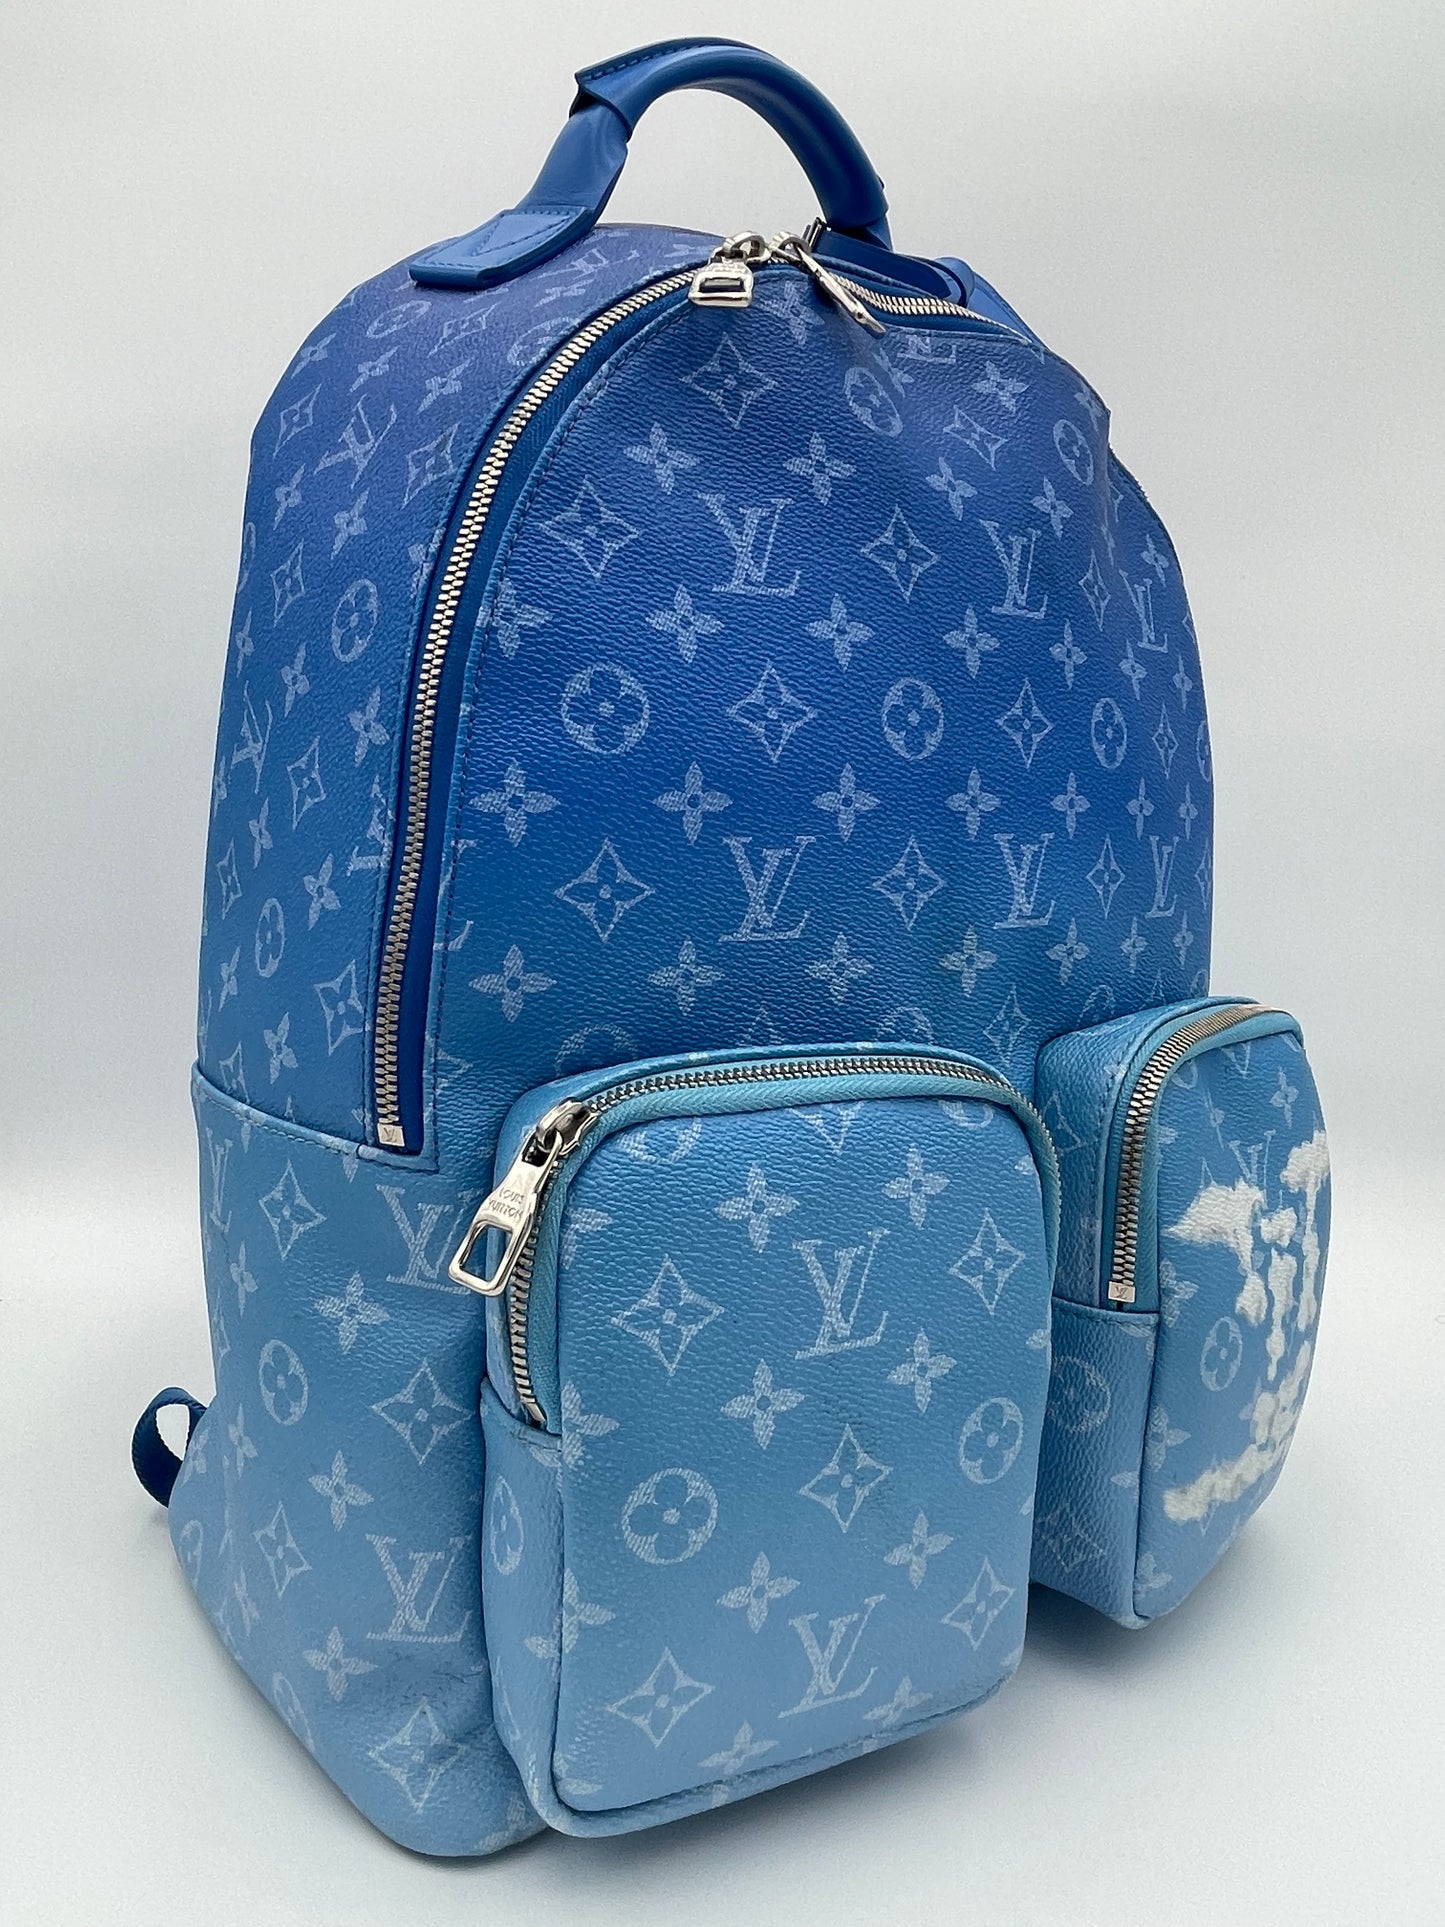 LOUIS VUTTION LIMITED EDITION MONOGRAM CLOUDS